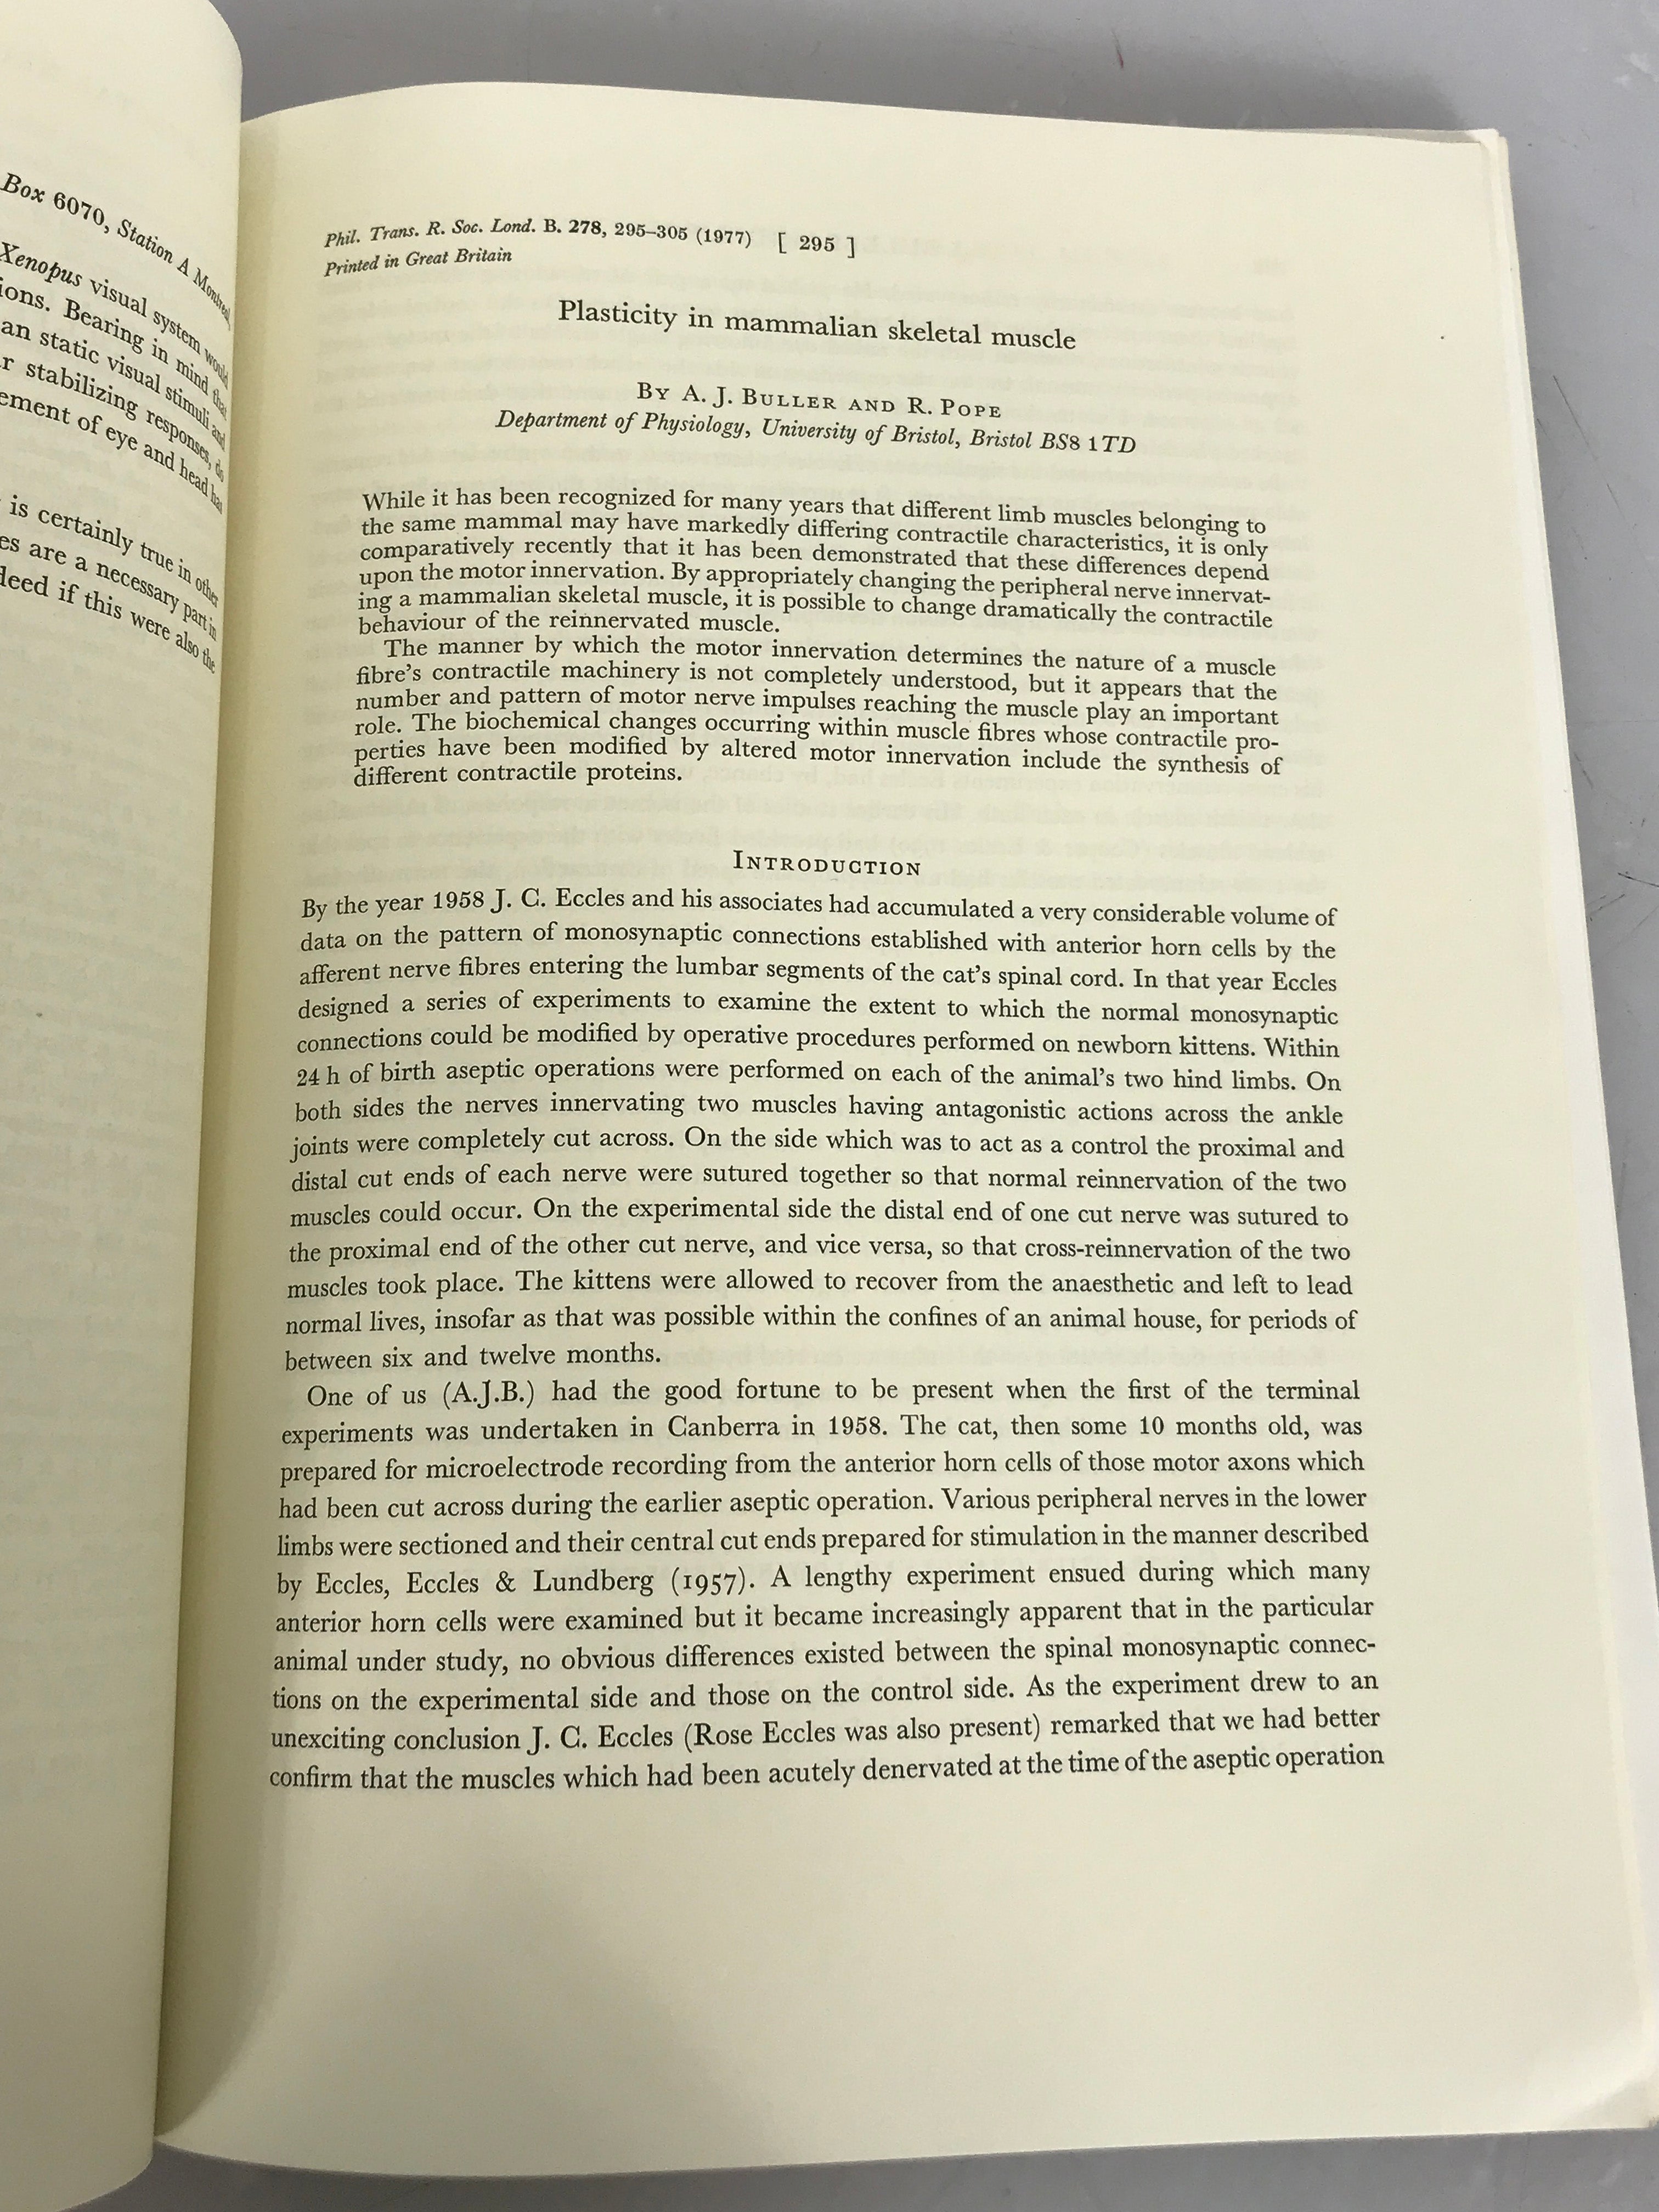 A Discussion on structural and functional aspects of plasticity: Philosophical Transactions of the Royal Society of London Vol 278 Biological Sciences April 1977 SC